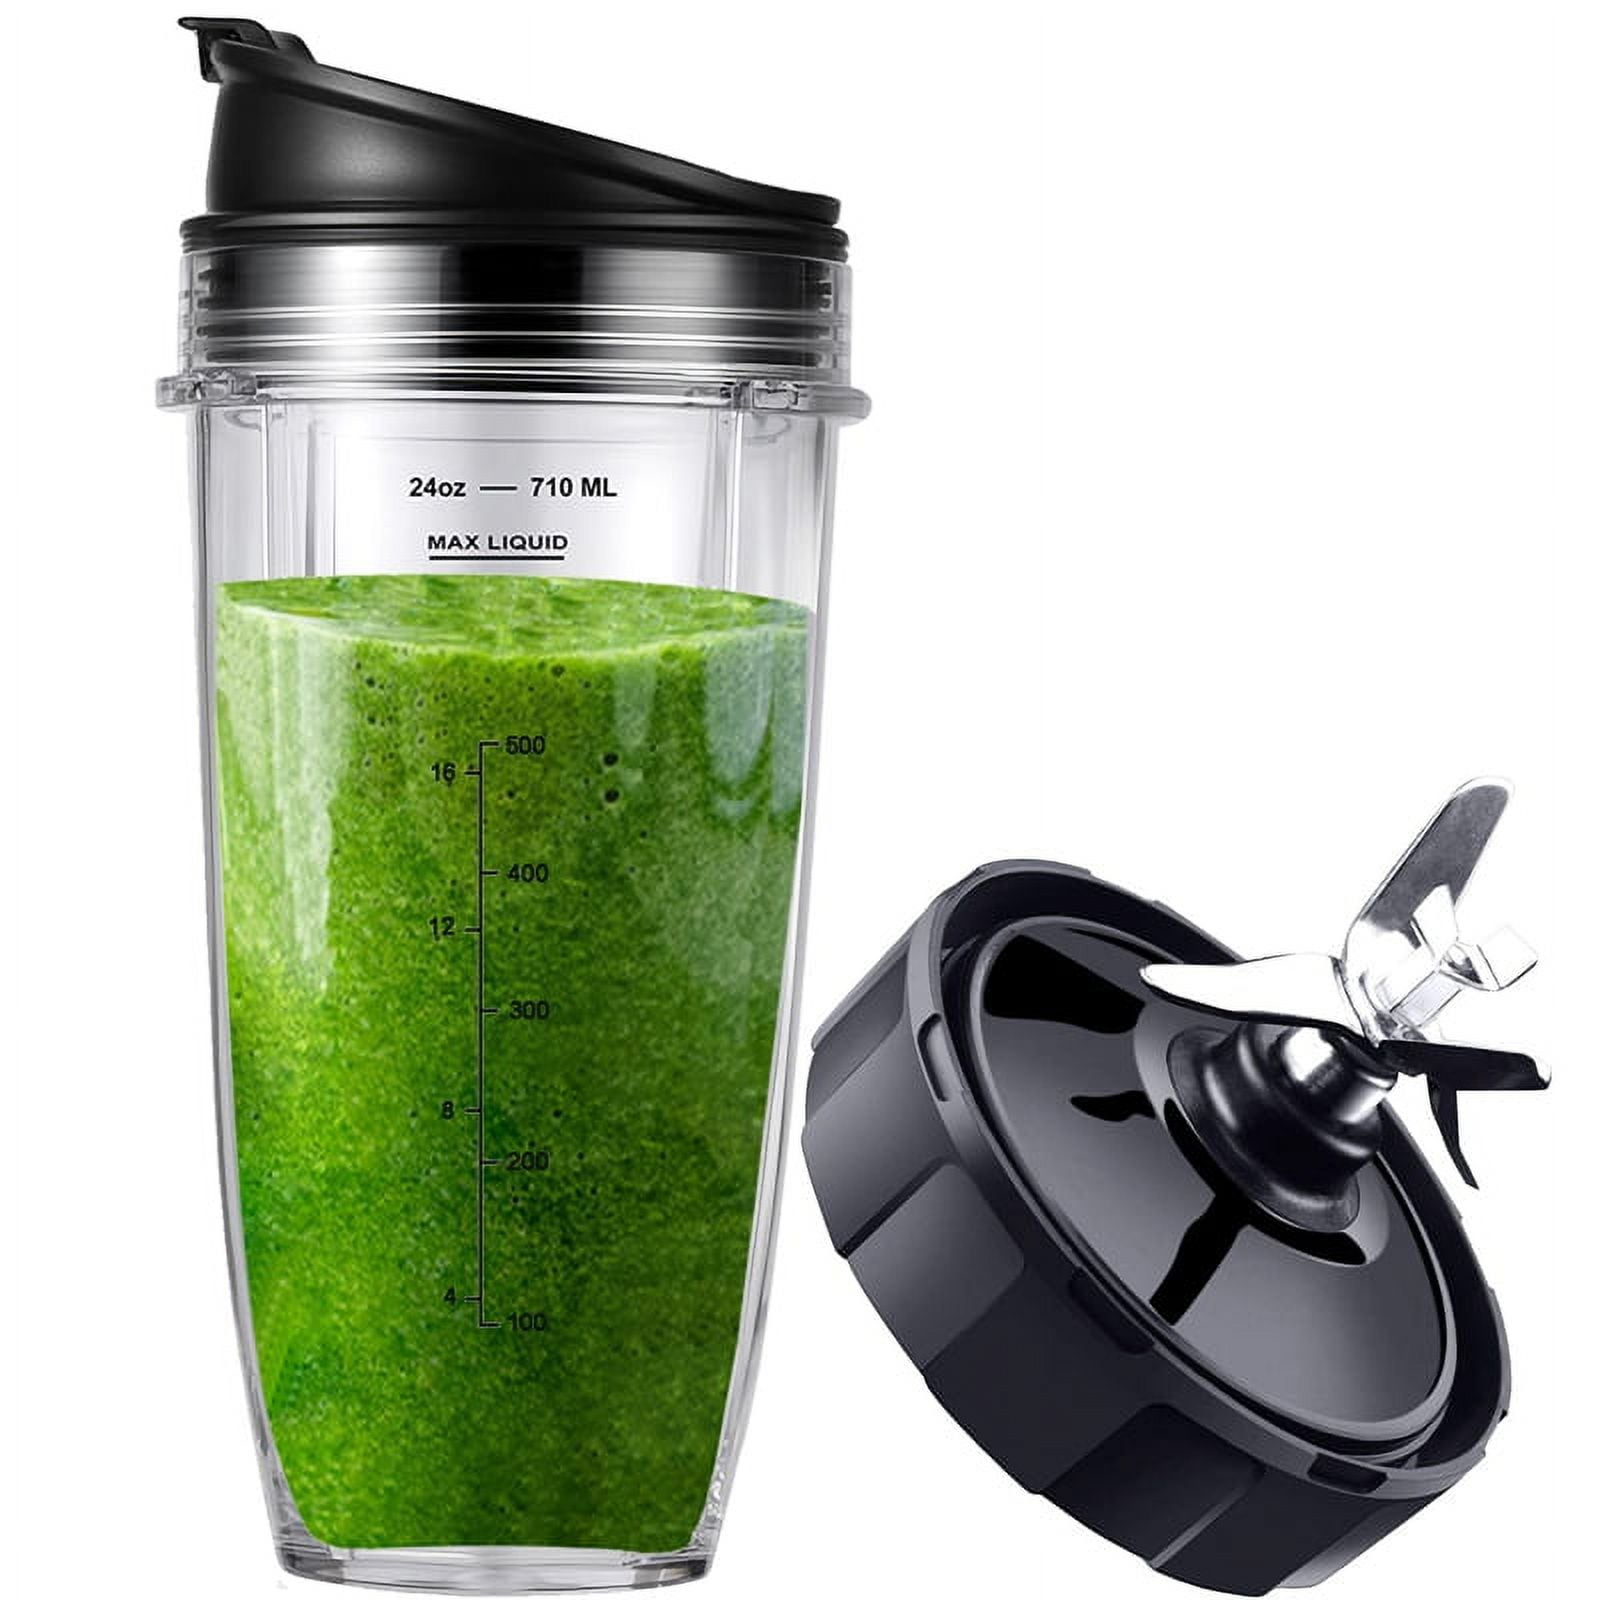 Replacement 24oz Nutri Ninja Blender Cup with Sip & Seal Lid For BL450  BL454 BL456 BL480 BL482 BL640 BL642 BL682 BN751 BN801 Foodi SS101 SS351  SS401 Ninja Blender Auto IQ Blade, 2-Pack 